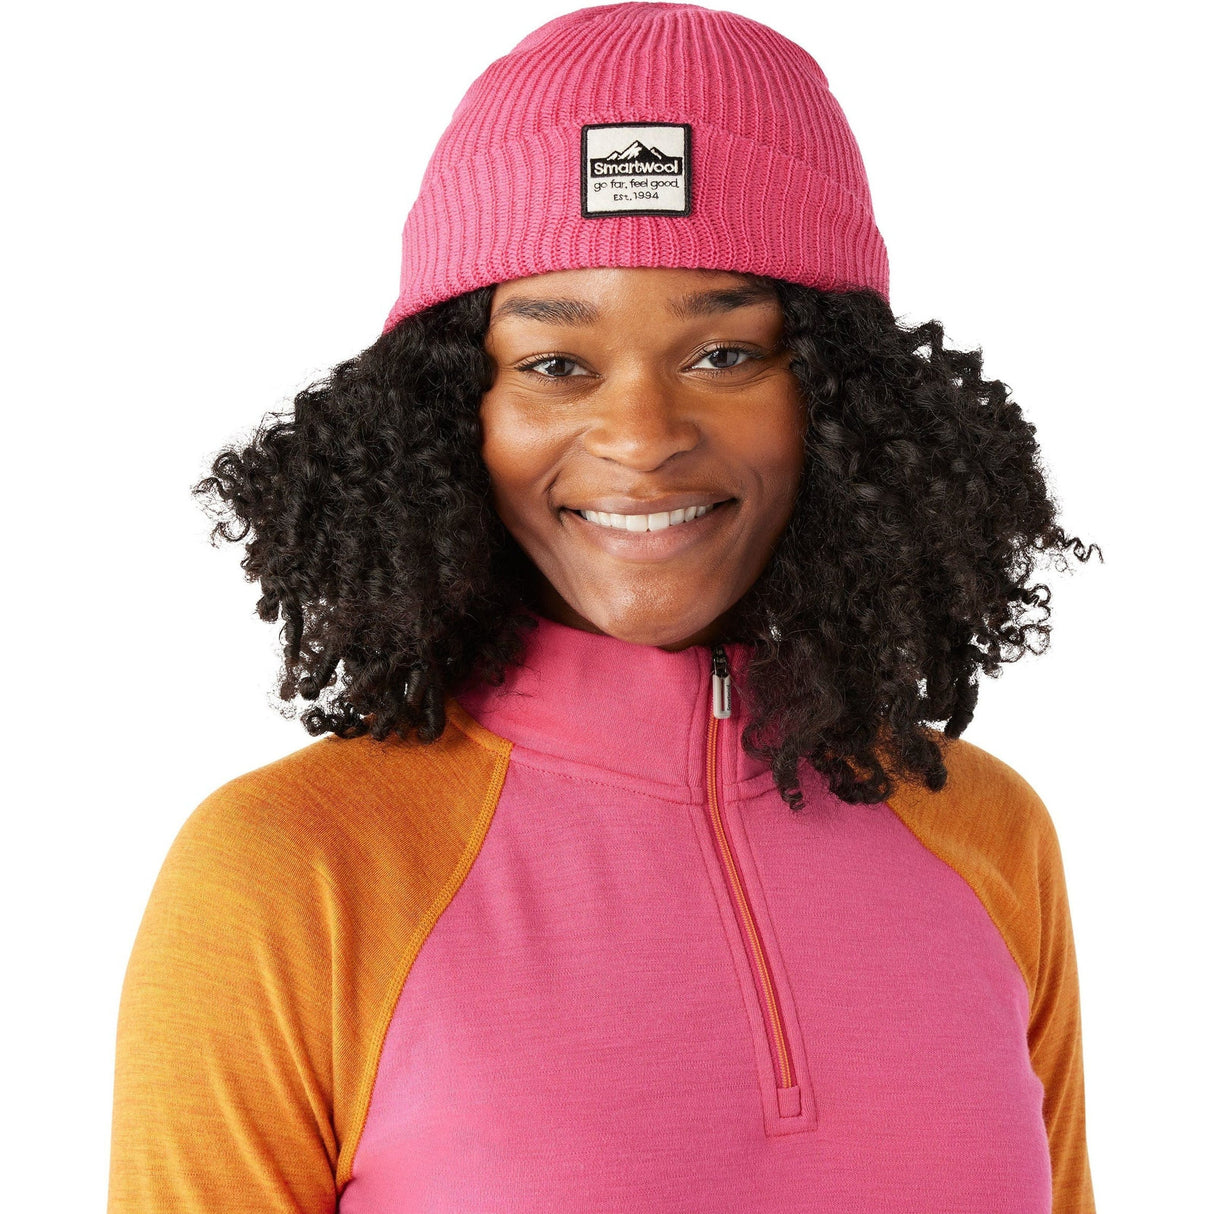 Smartwool Patch Beanie  - 